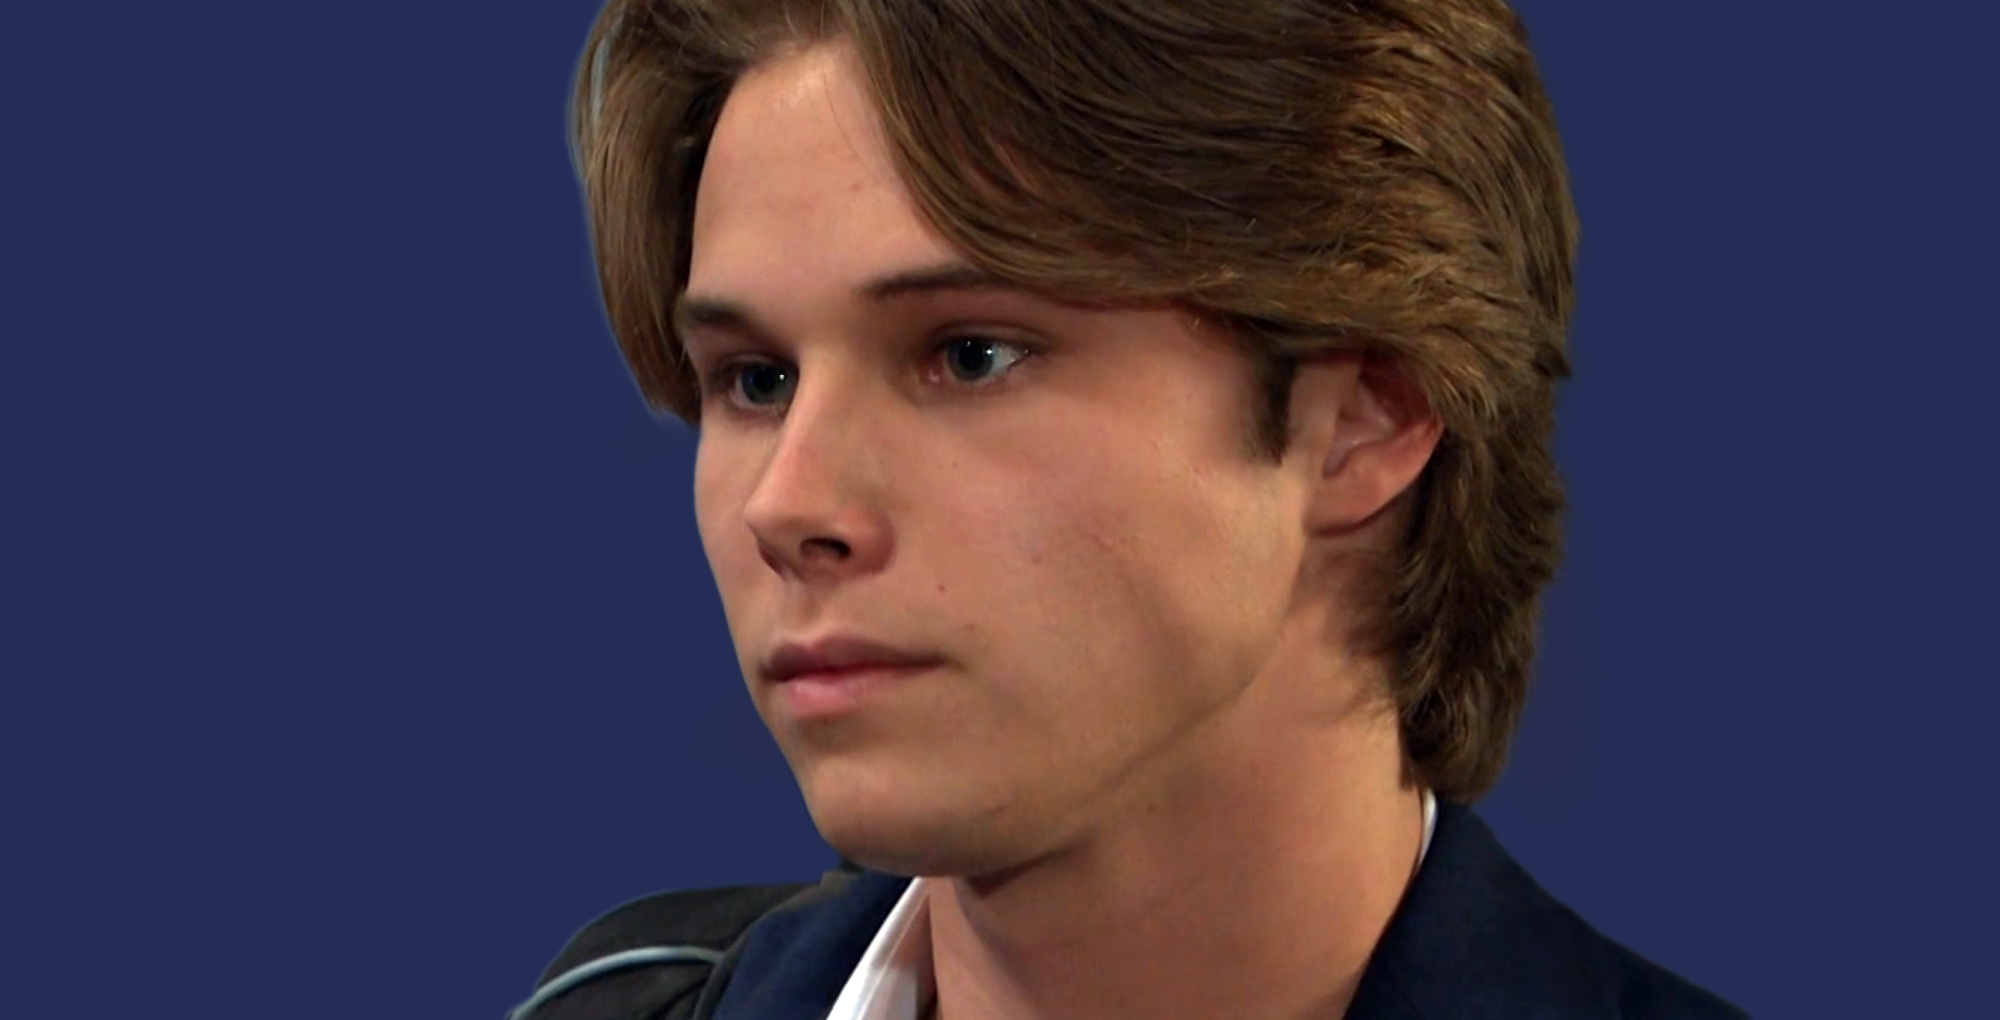 jamie martin mann plays tate black on days of our lives.